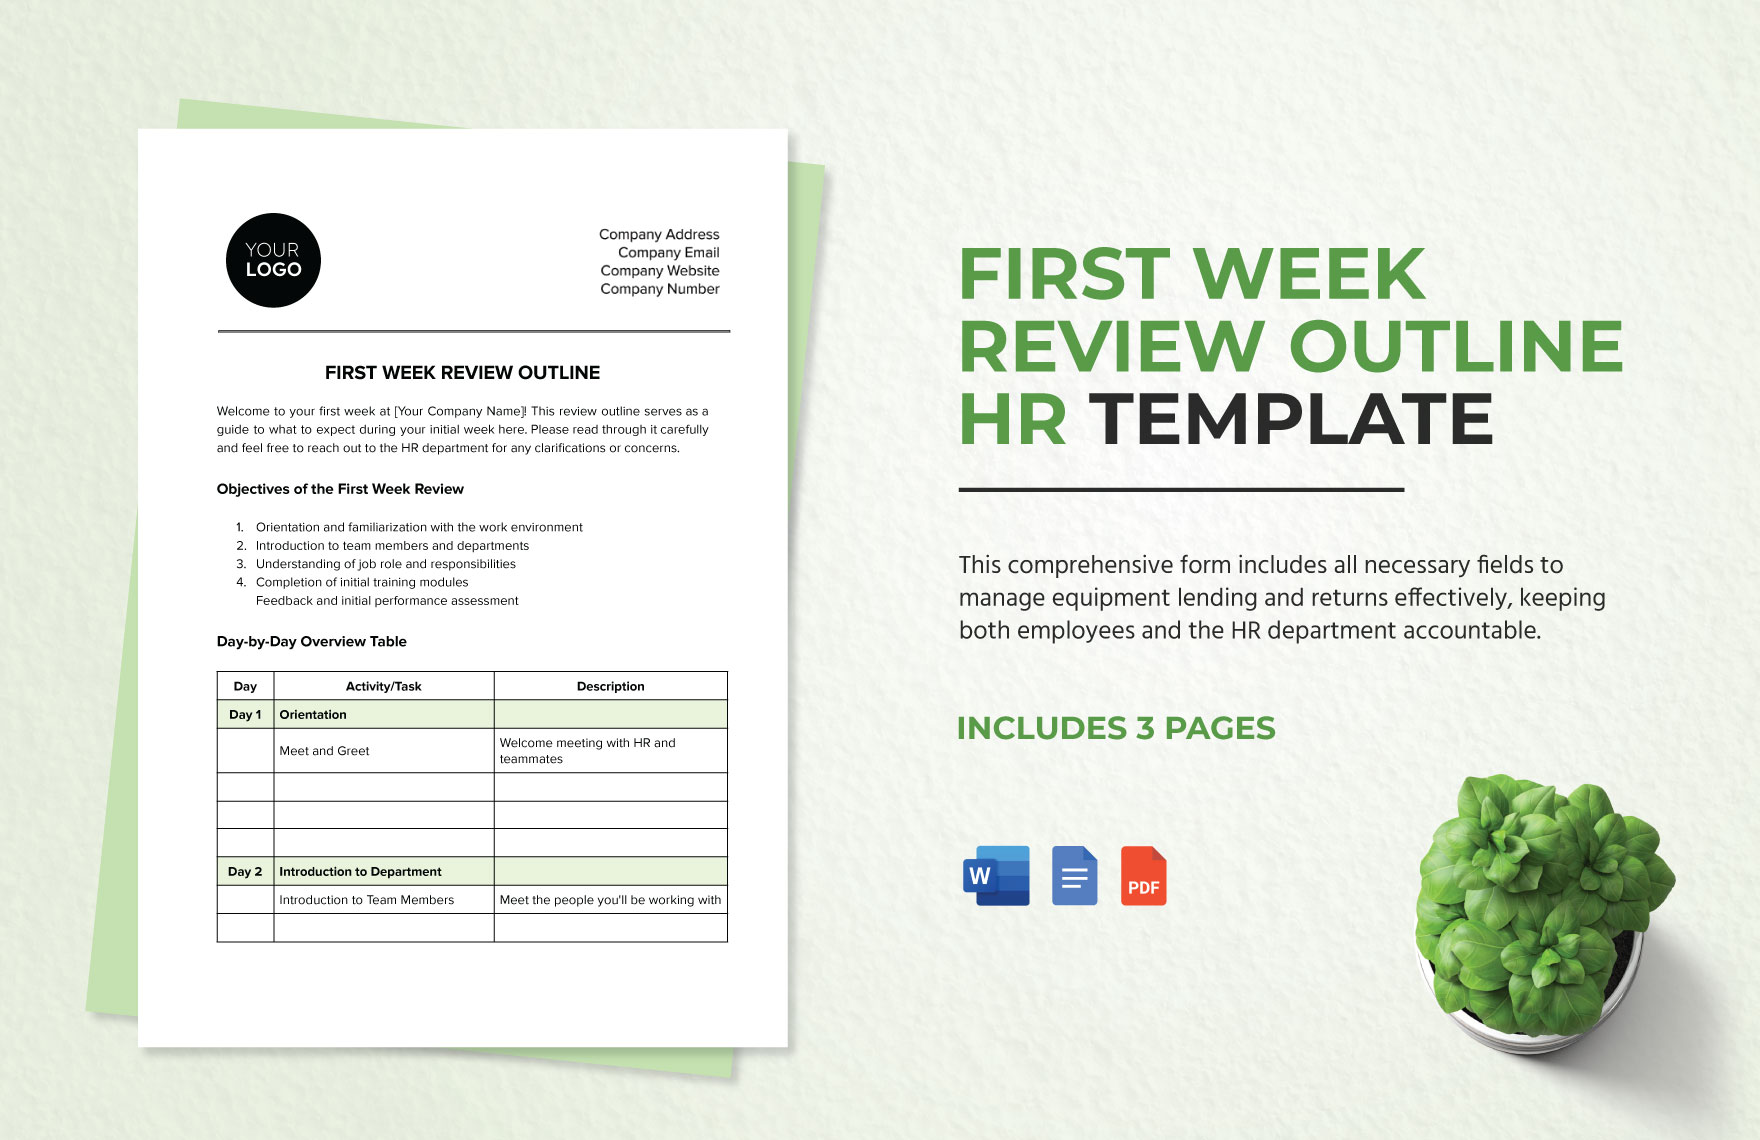 First Week Review Outline HR Template in Word, Google Docs, PDF